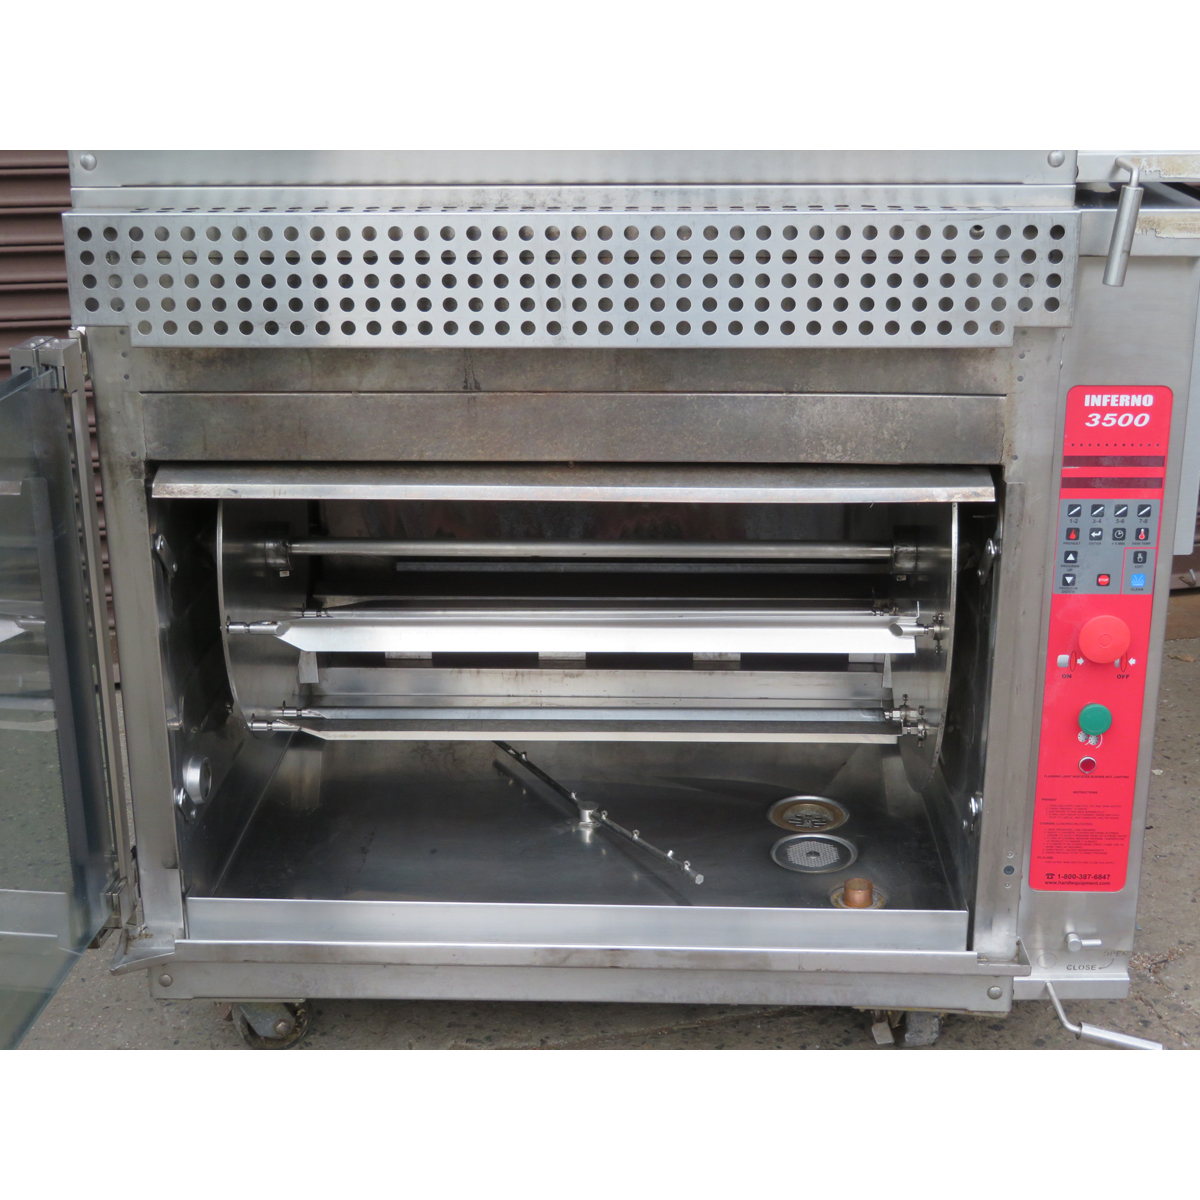 Hardt INFERNO-3500 Rotisserie, Used Great Condition image 3